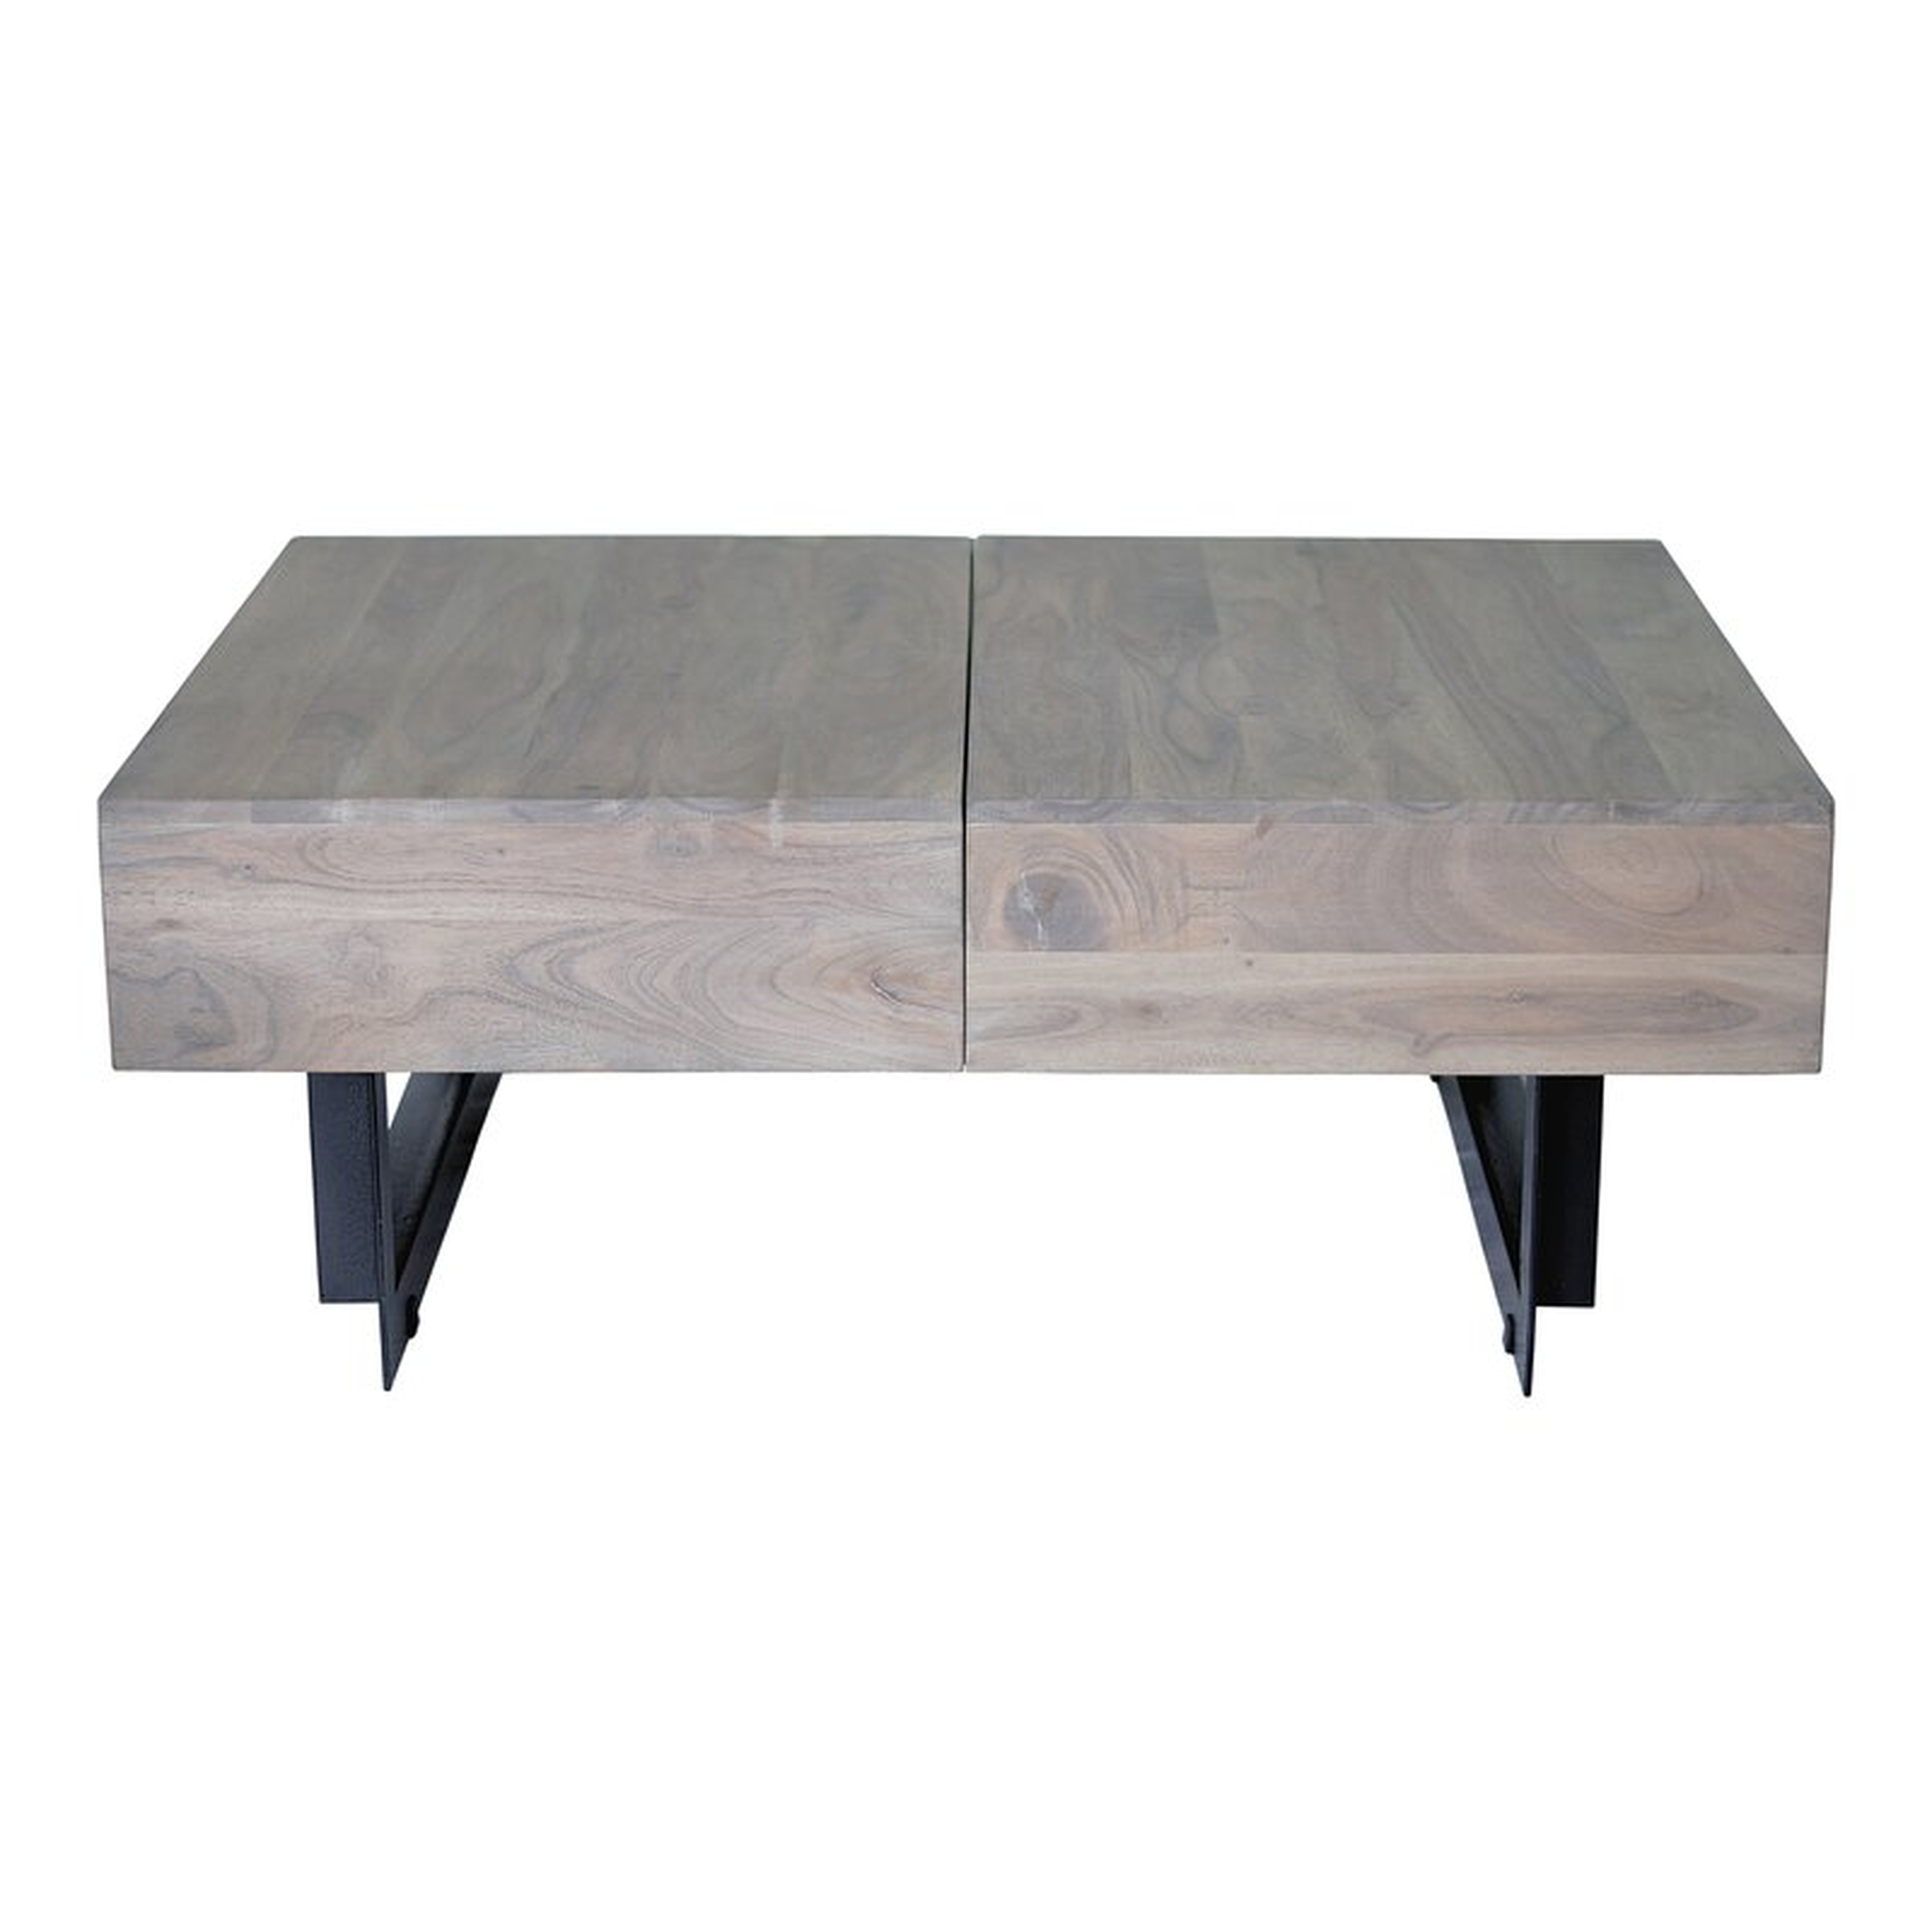 Tiburon Sled Coffee Table with Storage Table Top Color: Light Gray, Size: 15" H x 32" L x 42" W - Perigold